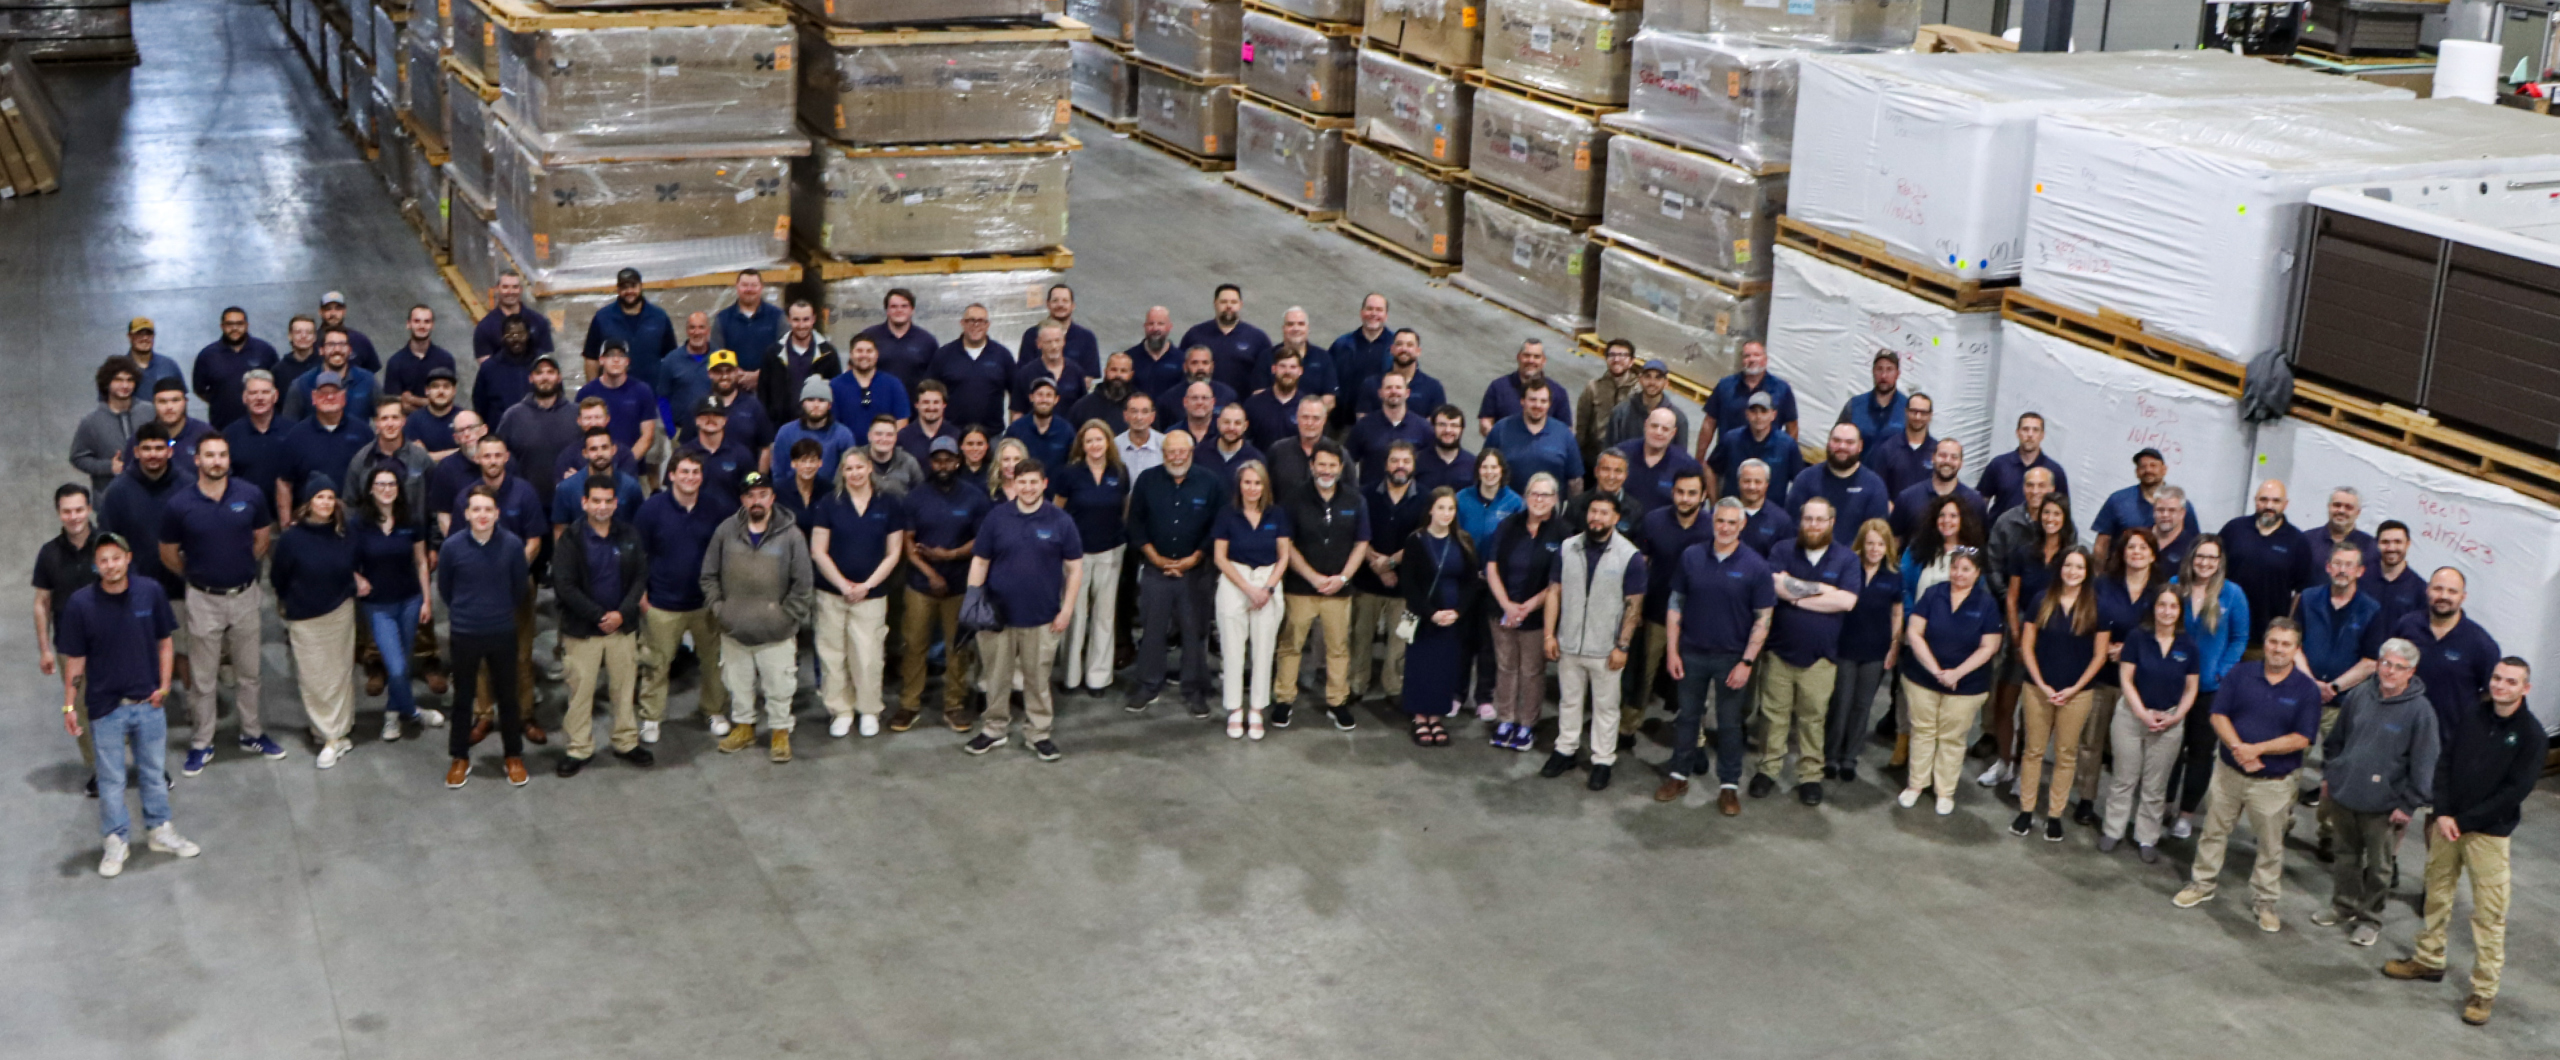 Team photo of the Mainely Tubs employees in the warehouse.